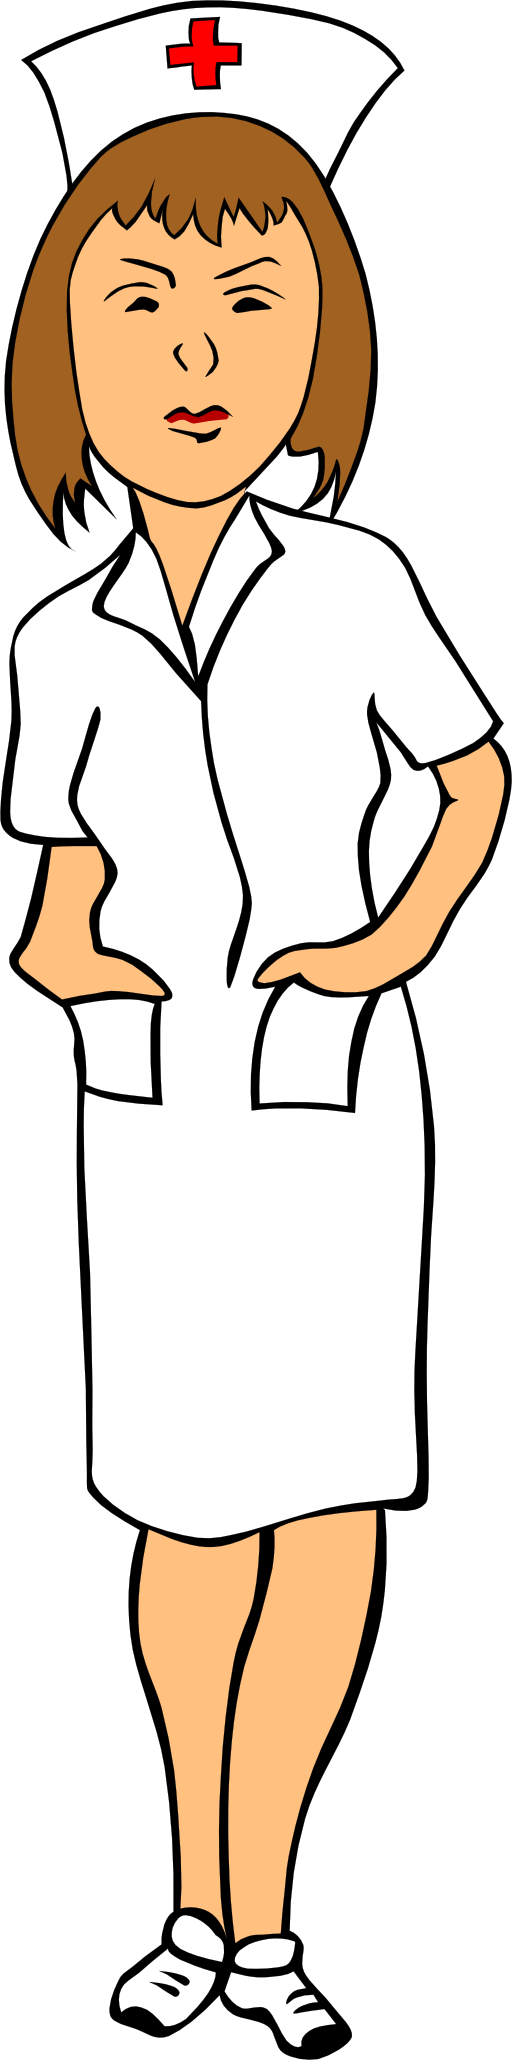 Image Of A Nurse | Free Download Clip Art | Free Clip Art | on ...